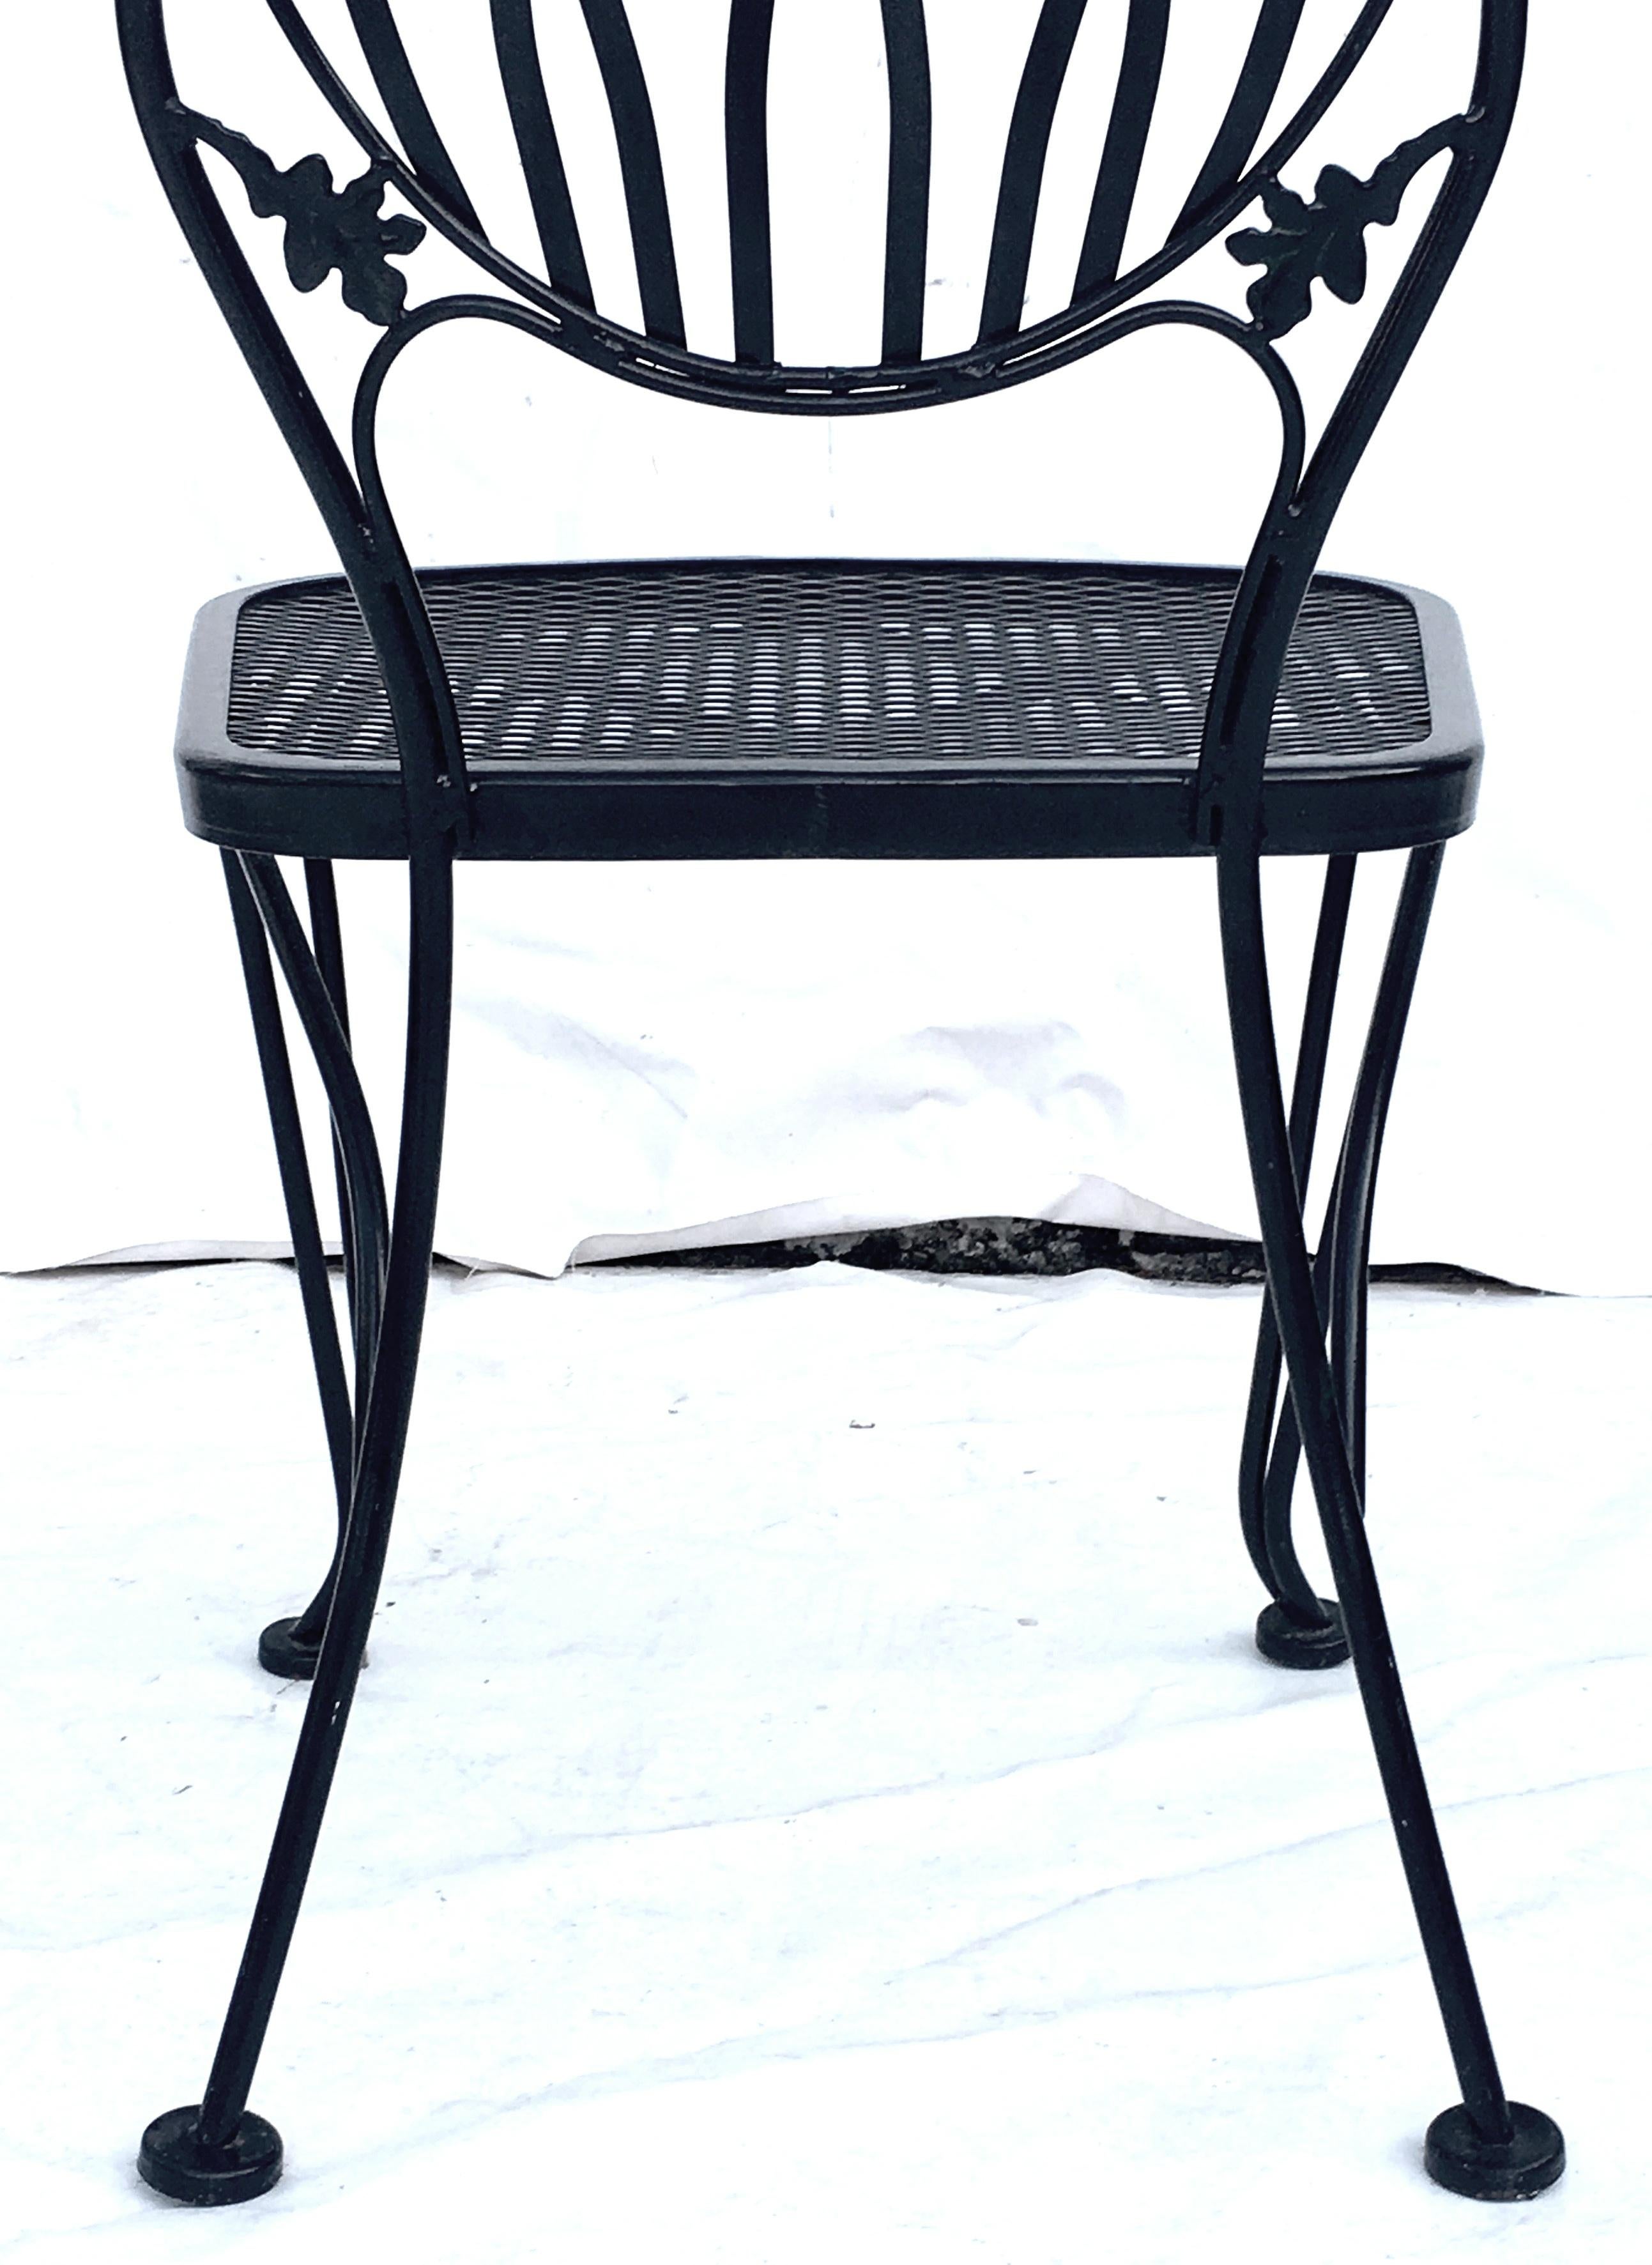 1950'S Wrought Iron Mesh Floral & Vine Chairs By Woodard-S/5 For Sale 1